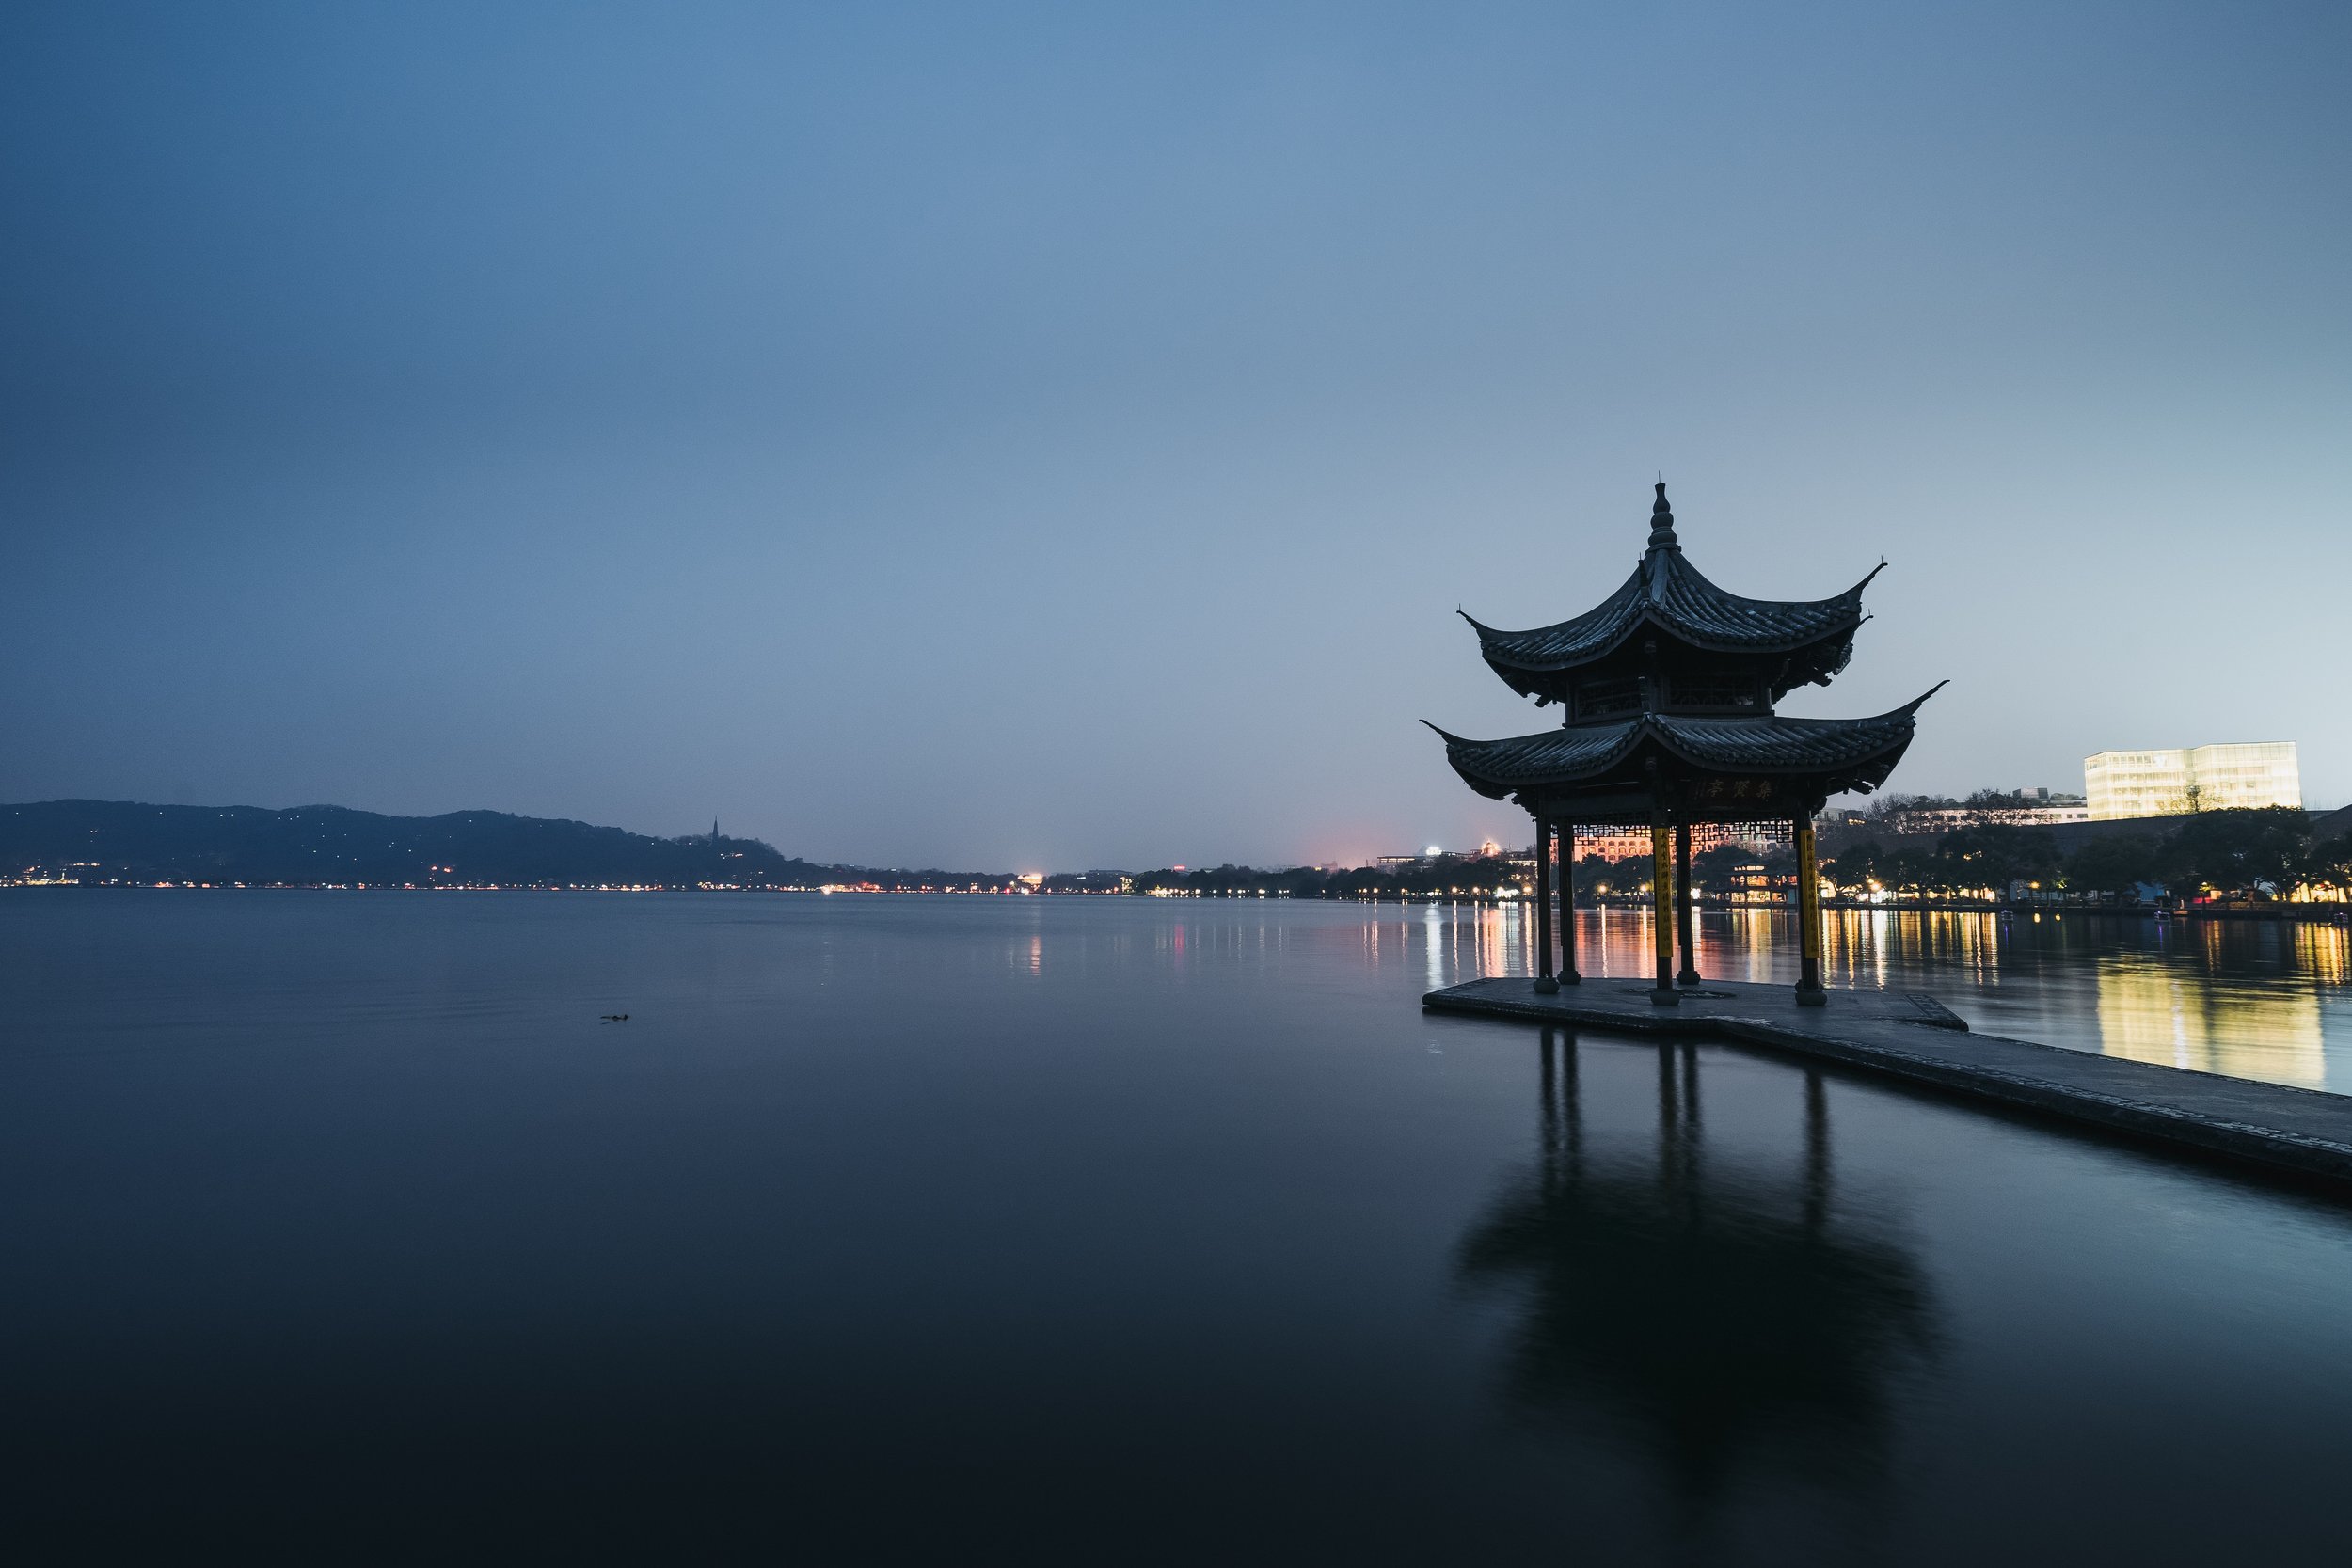 The West Lake is a six kilometre square lake in Hangzhou, Zhejiang province, that is surrounded by ancient buildings, gardens, picturesque hills and tea farms. The West Lake is undoubtedly the highlight of the city that Marco Polo described in the 1…